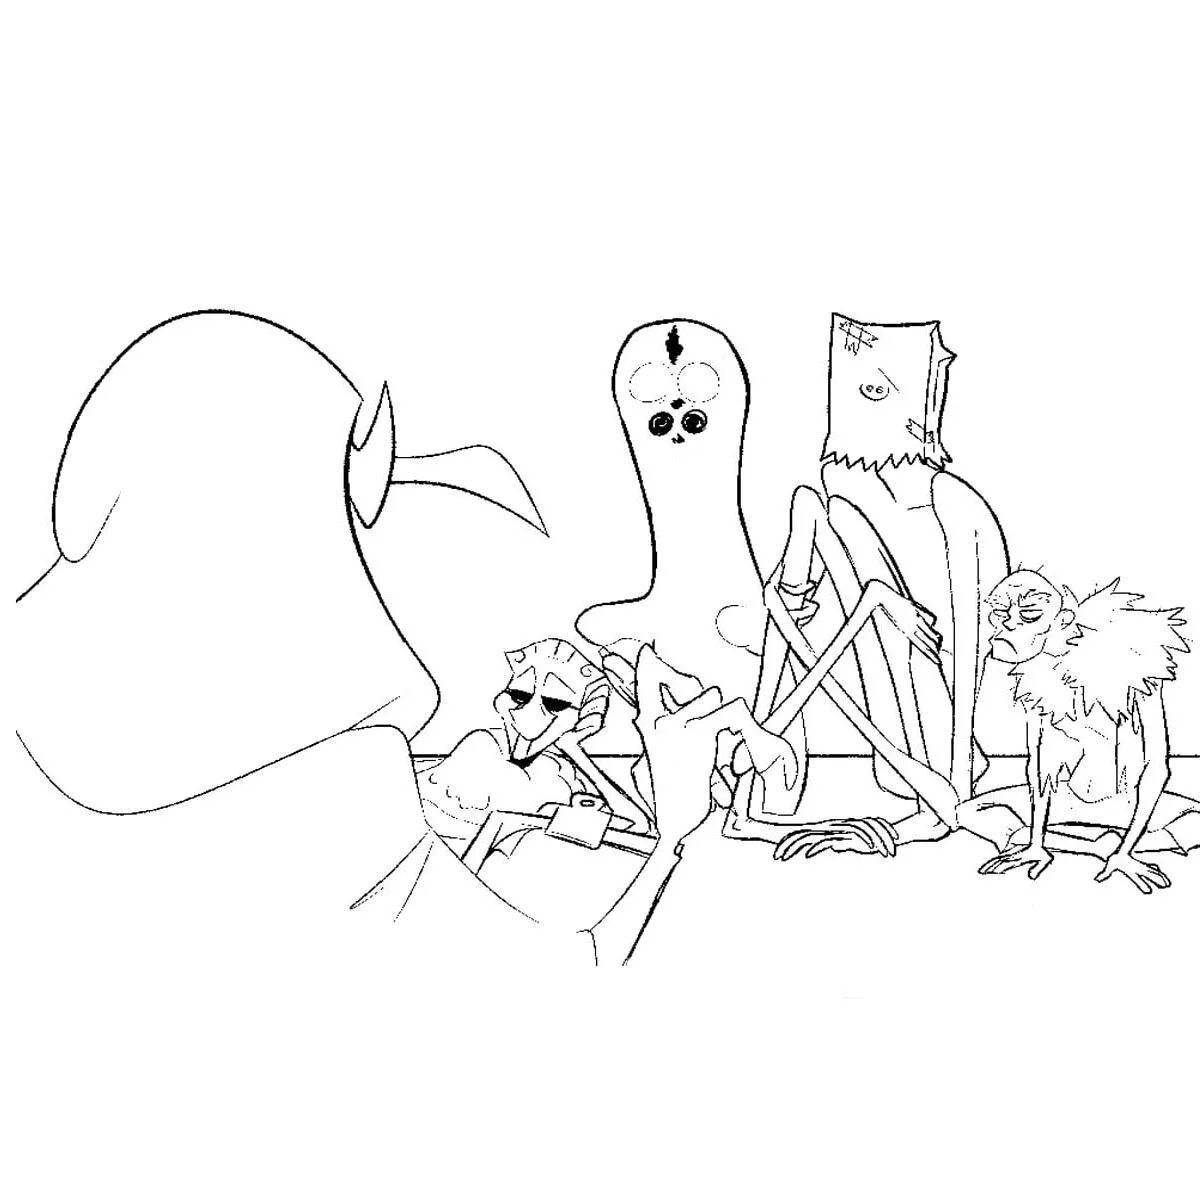 Scp 096 playful coloring page